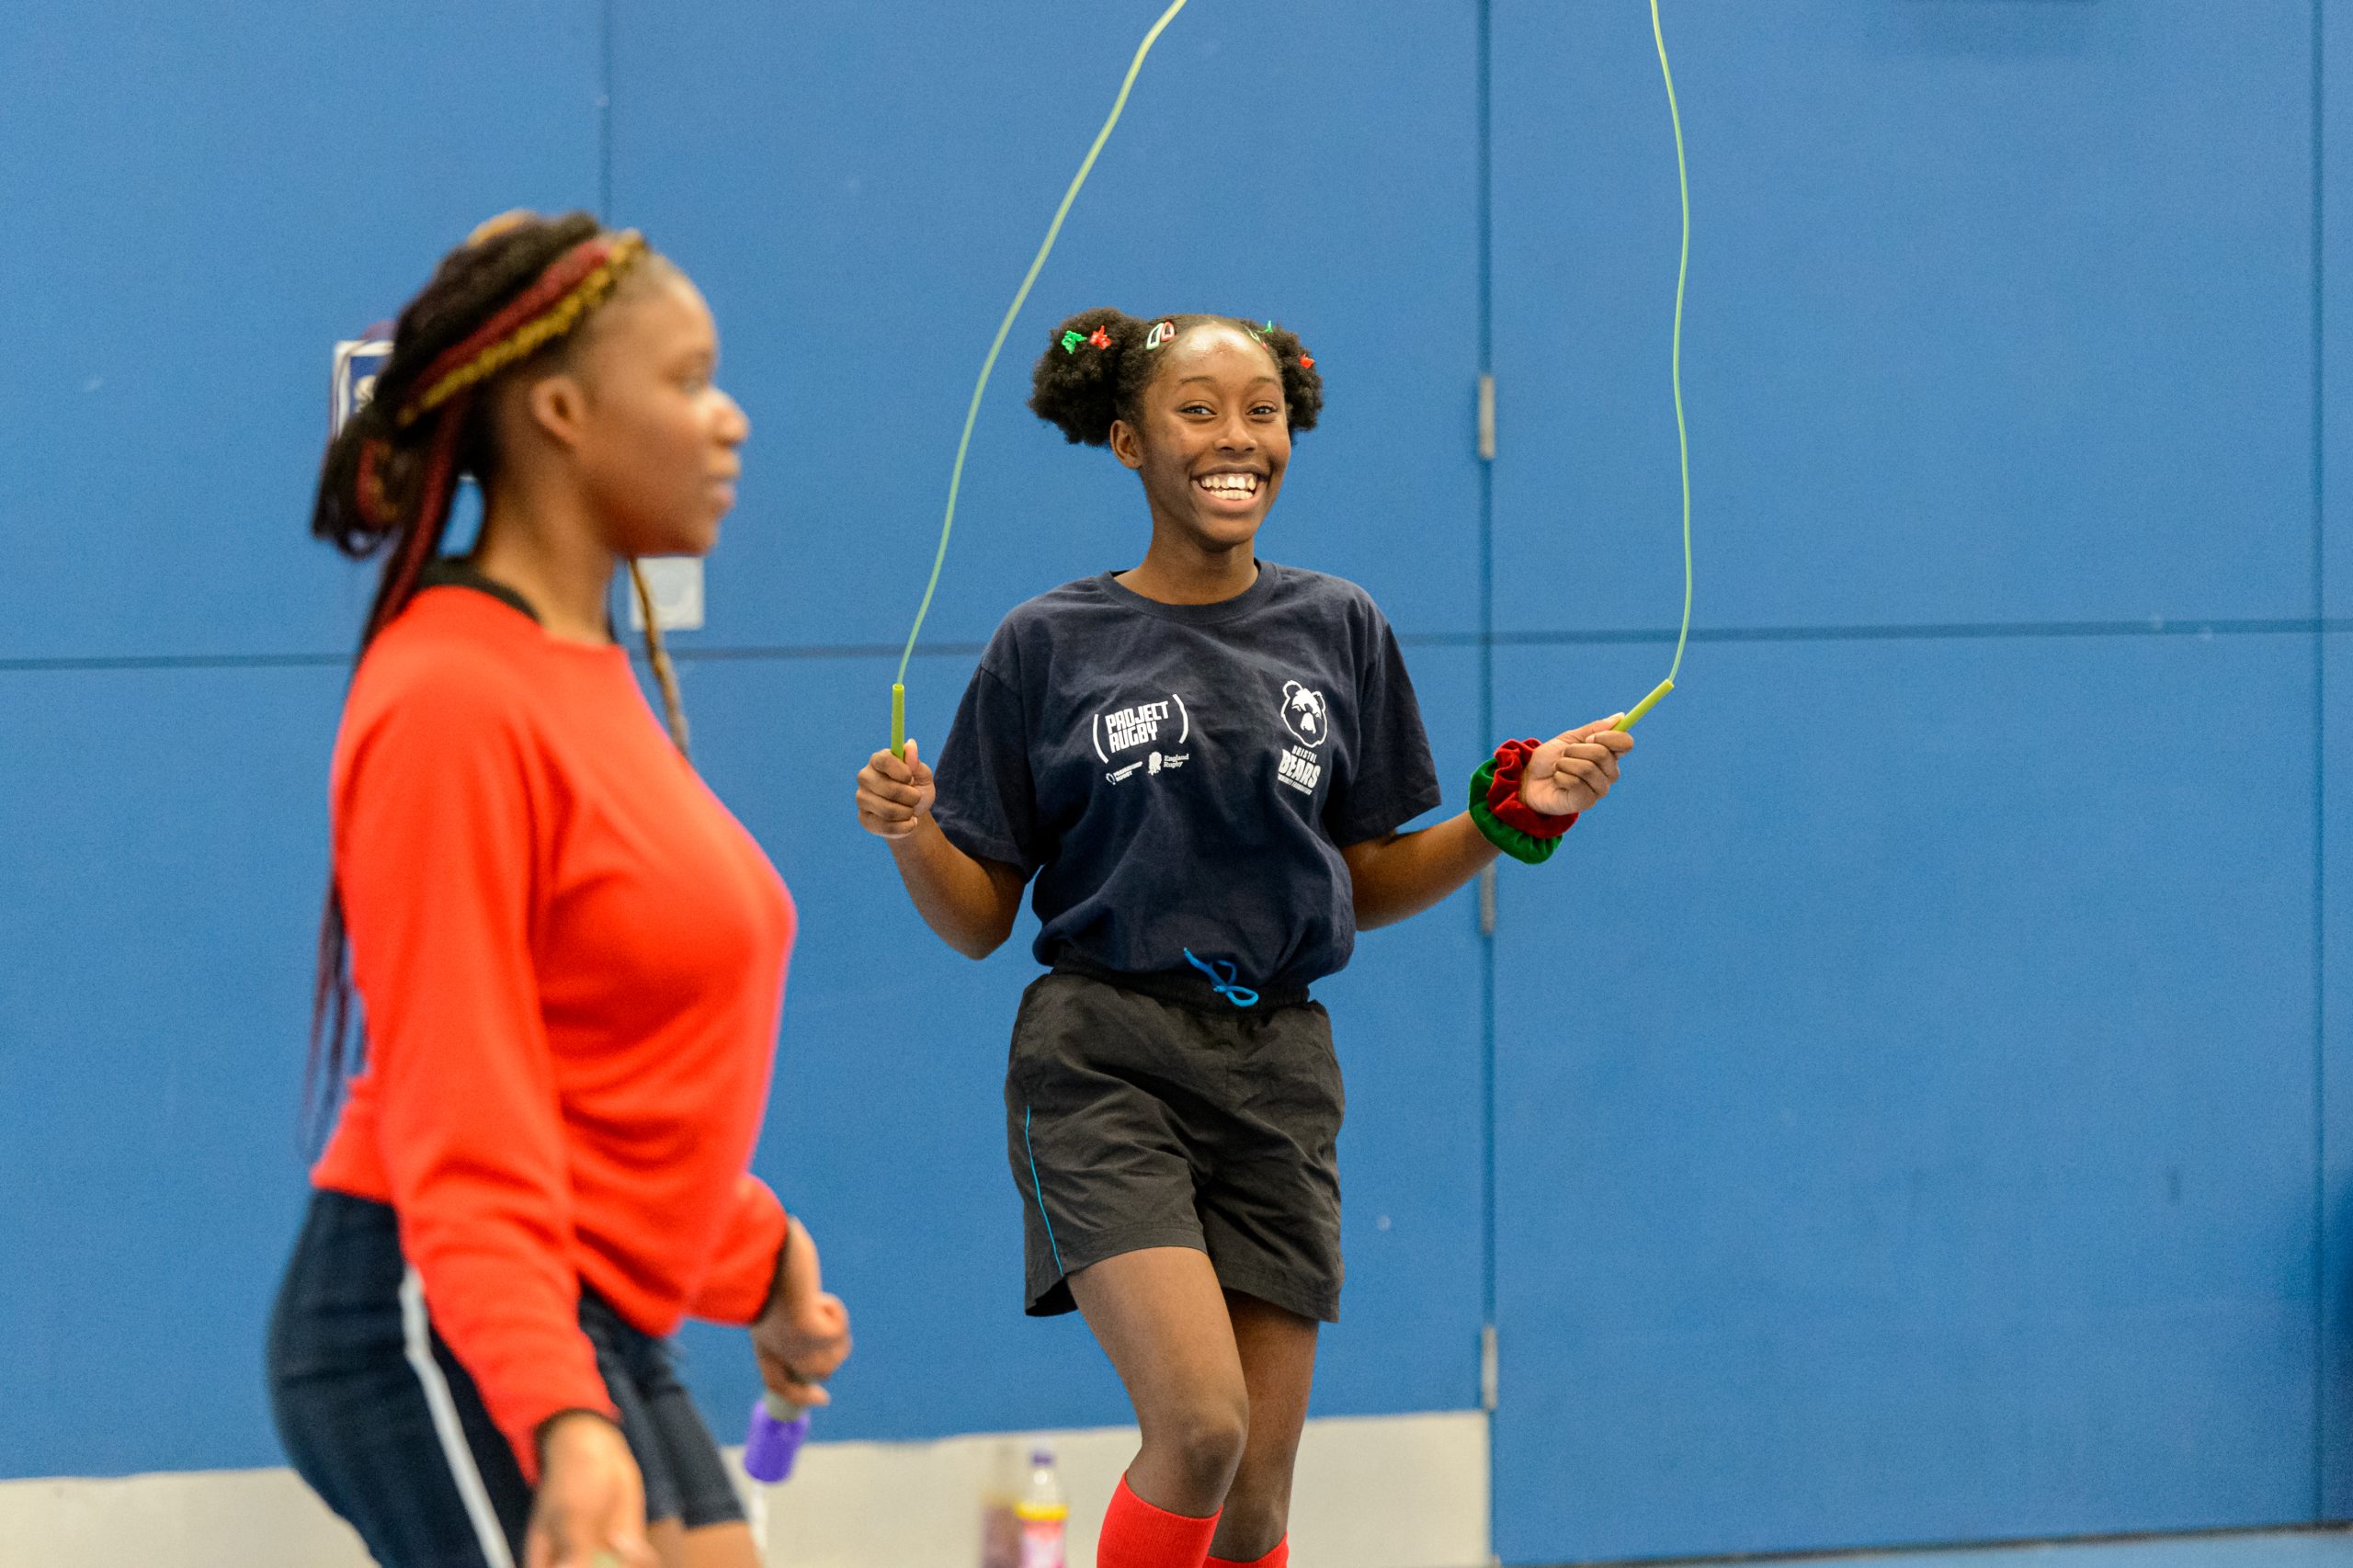 Young black woman aged 13-15 playing with a skipping rope